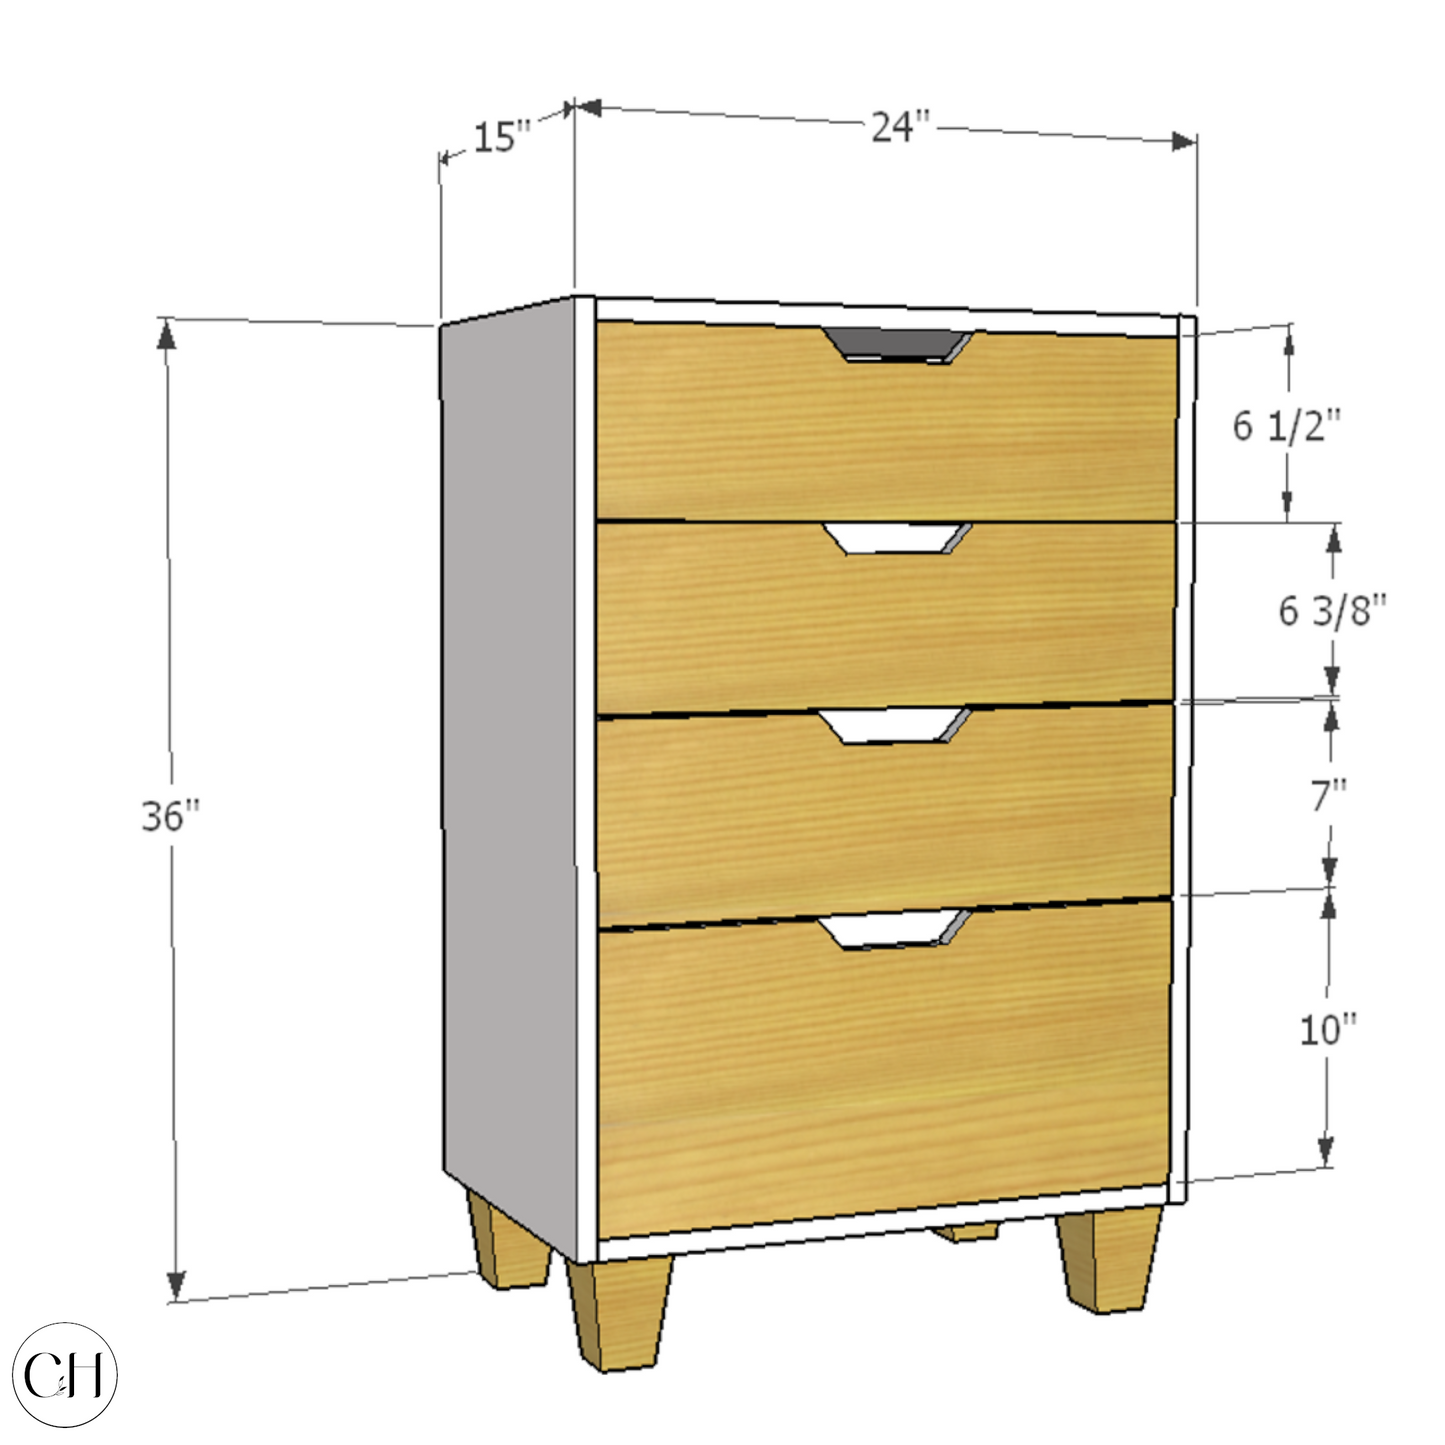 CustHum - 2D drawing of compact chest of drawers without handles, white and wood finish, showing dimensions